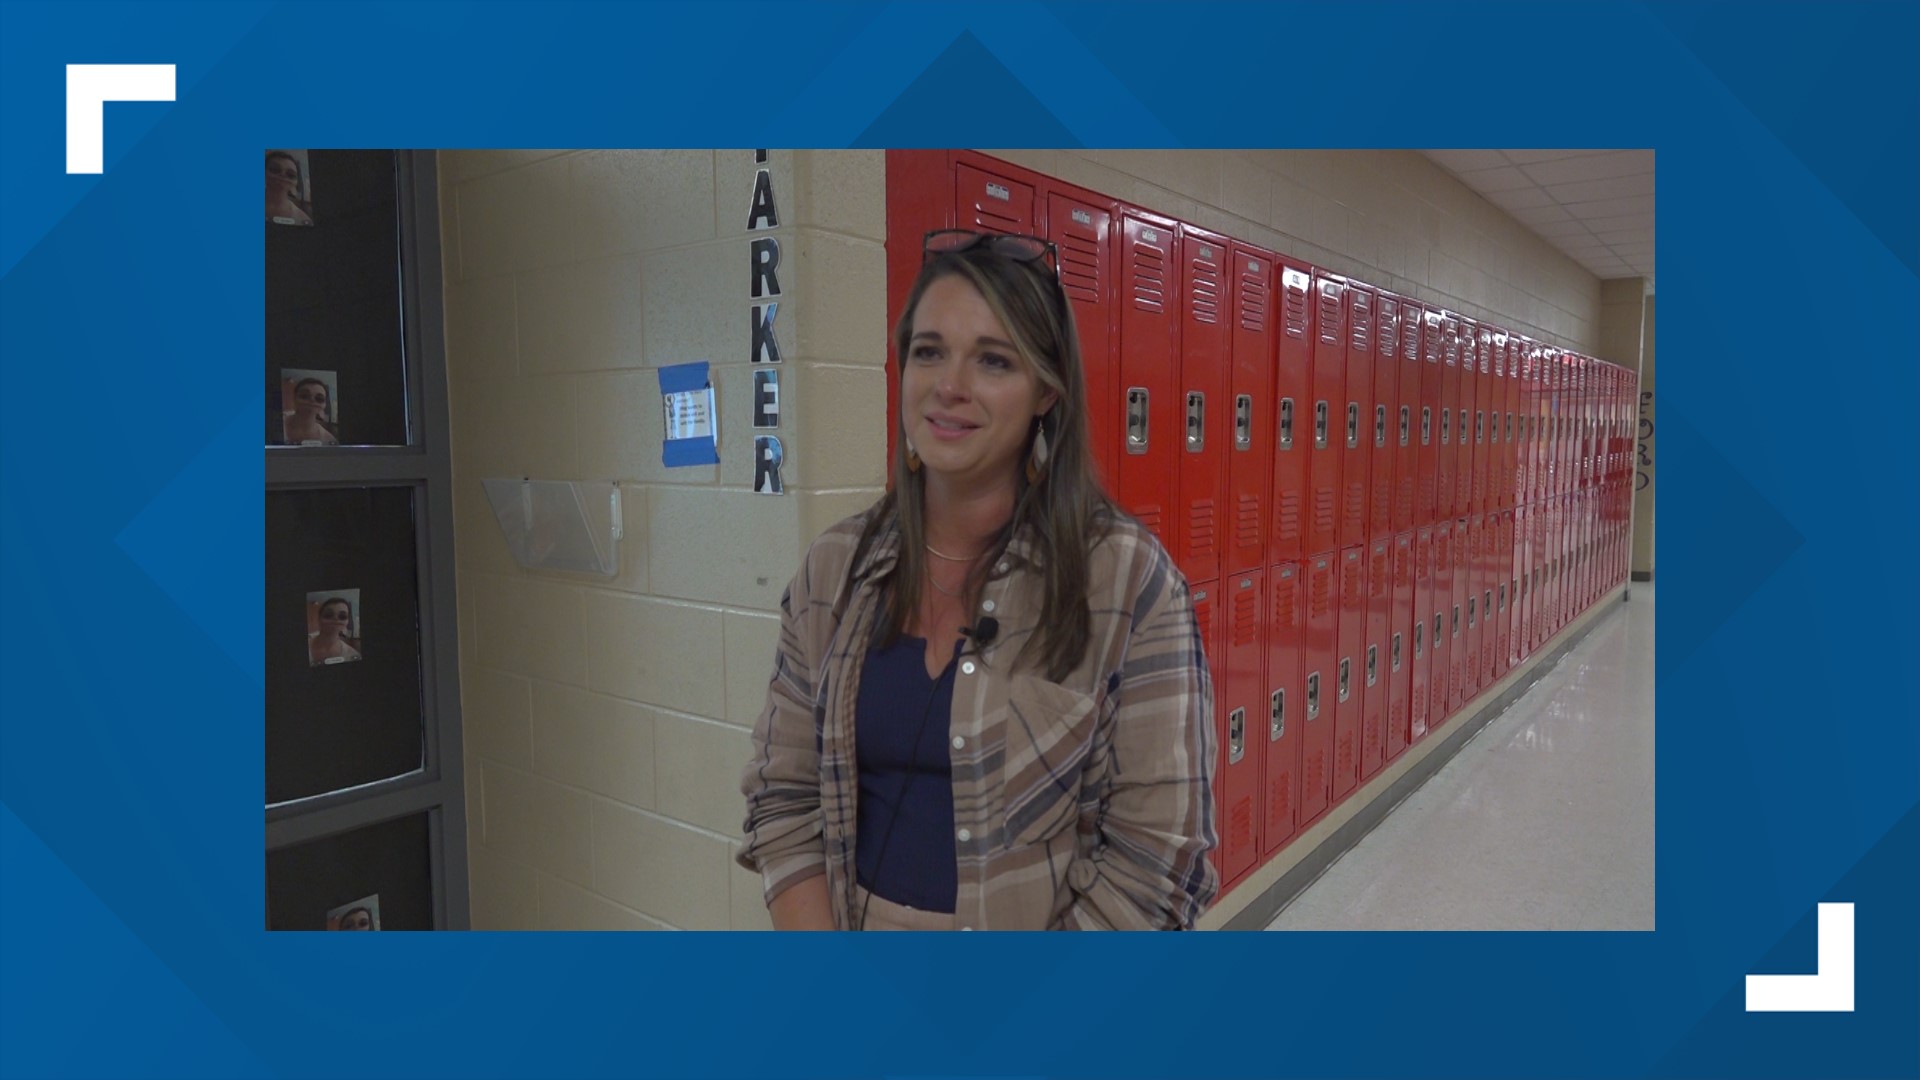 Sarah Parker has taught at Moulton Middle School for two years.